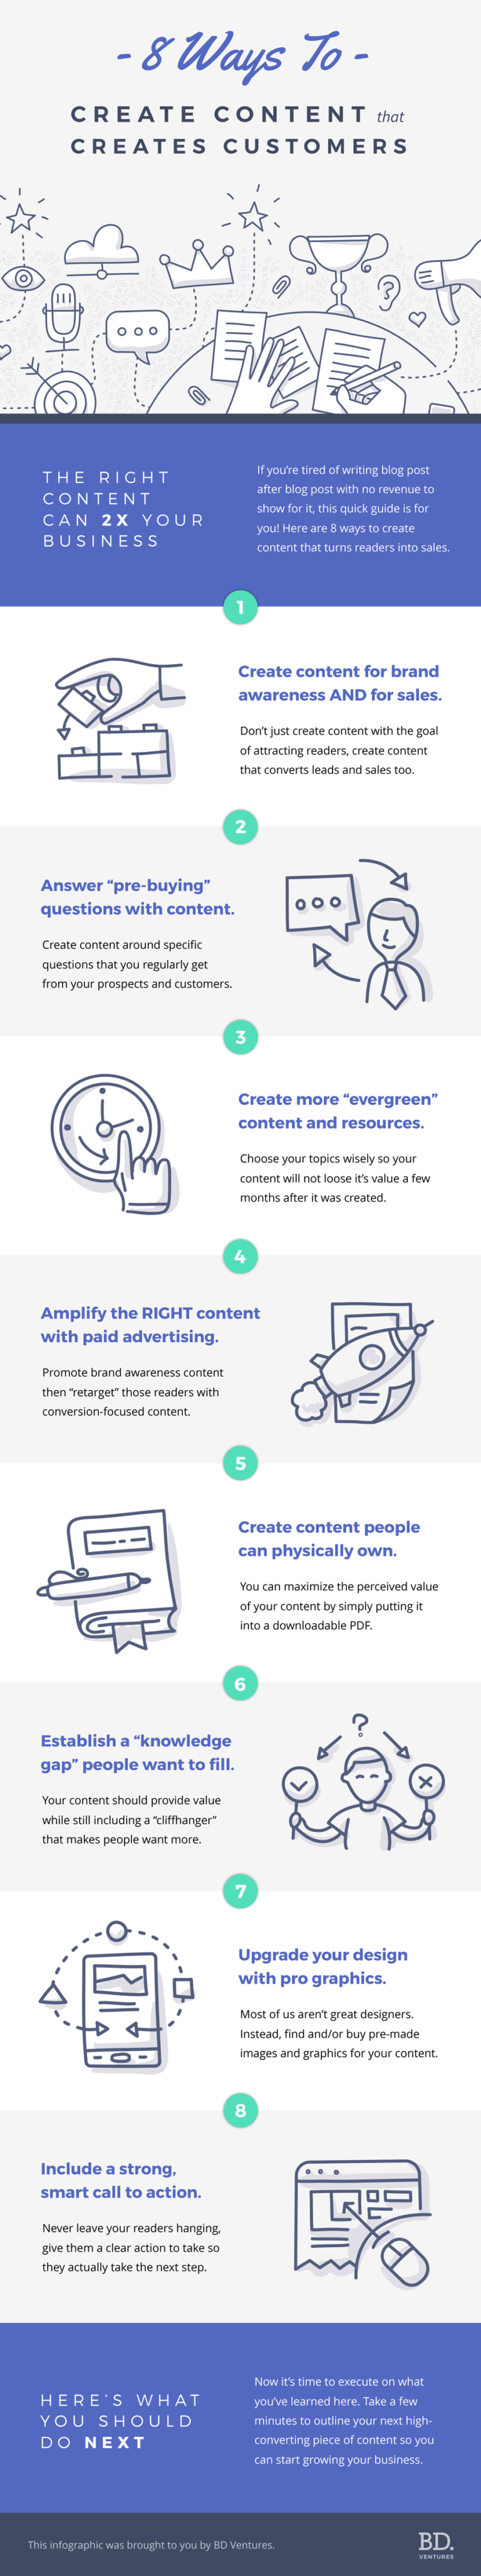 Content Marketing: 8 Tips On How To Create Content That Converts [Infographic]
